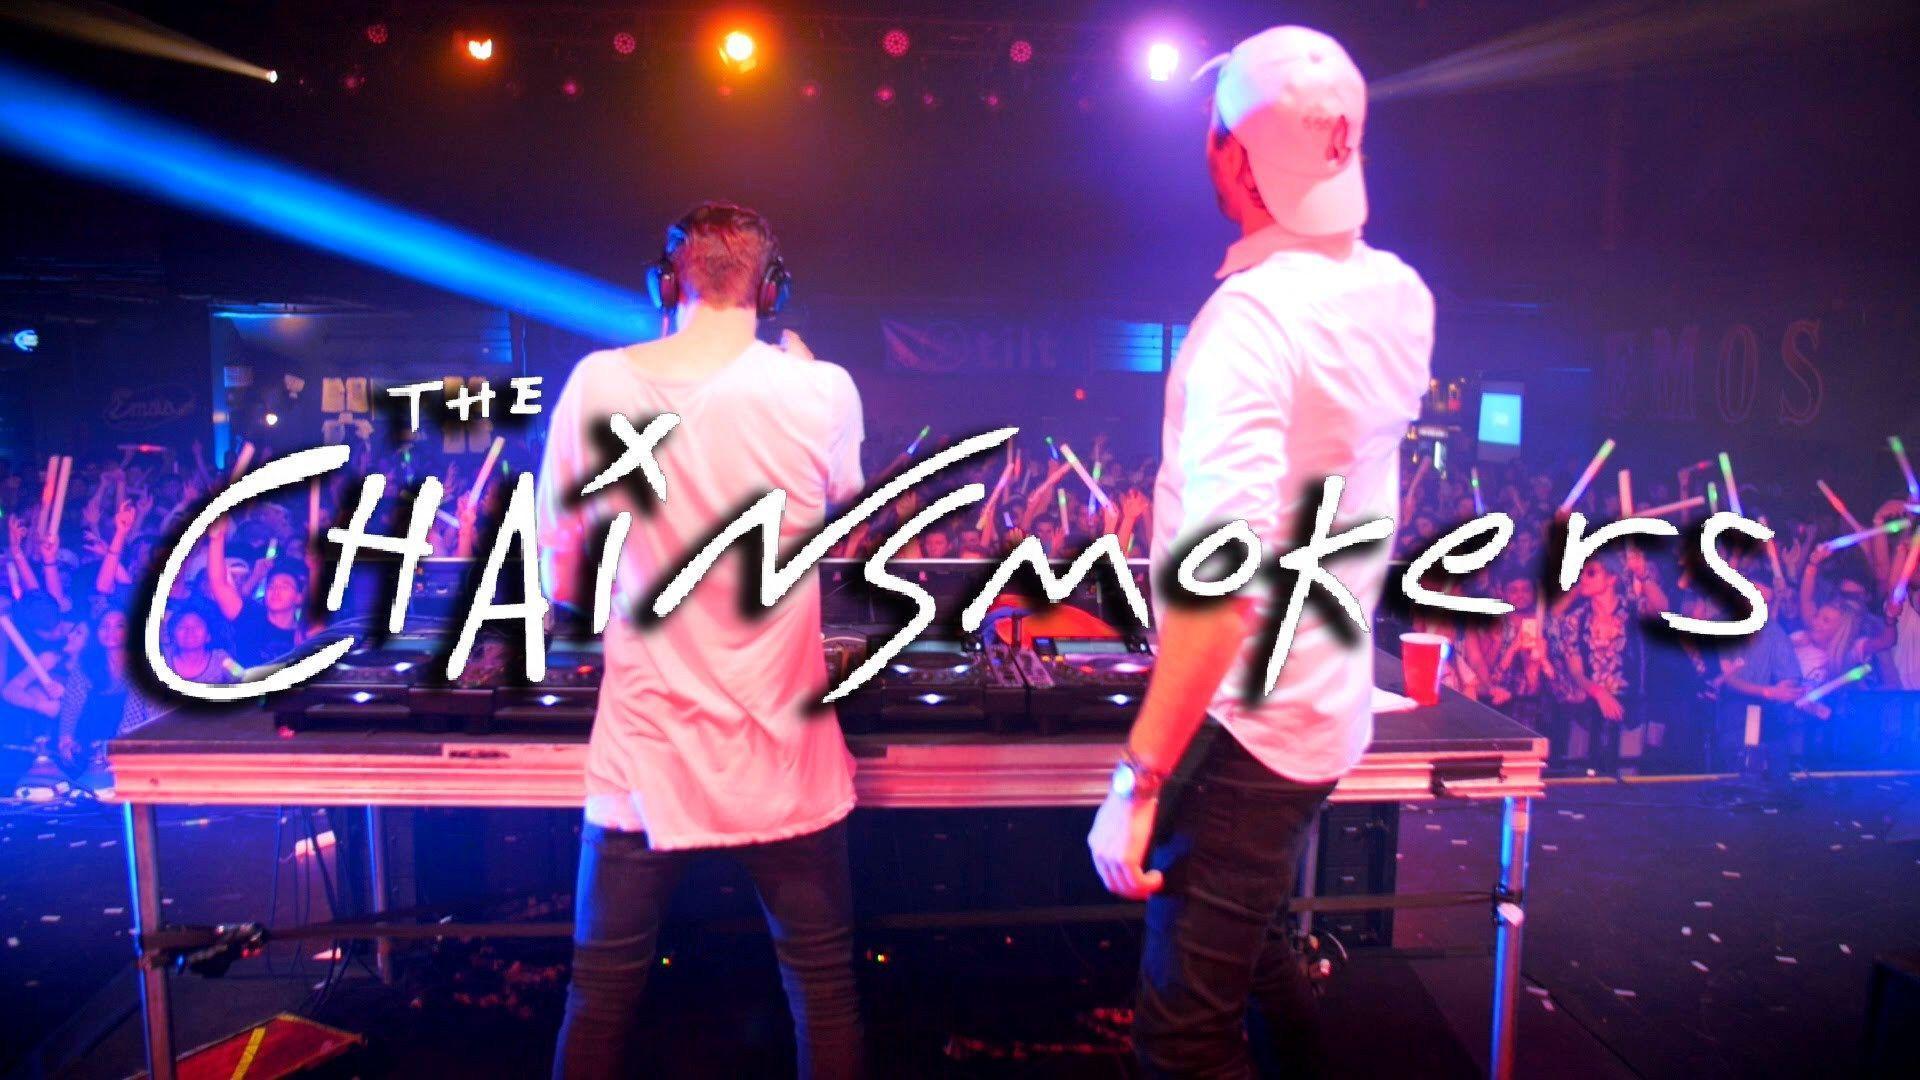 The Chainsmokers Wallpaper Image Photo Picture Background